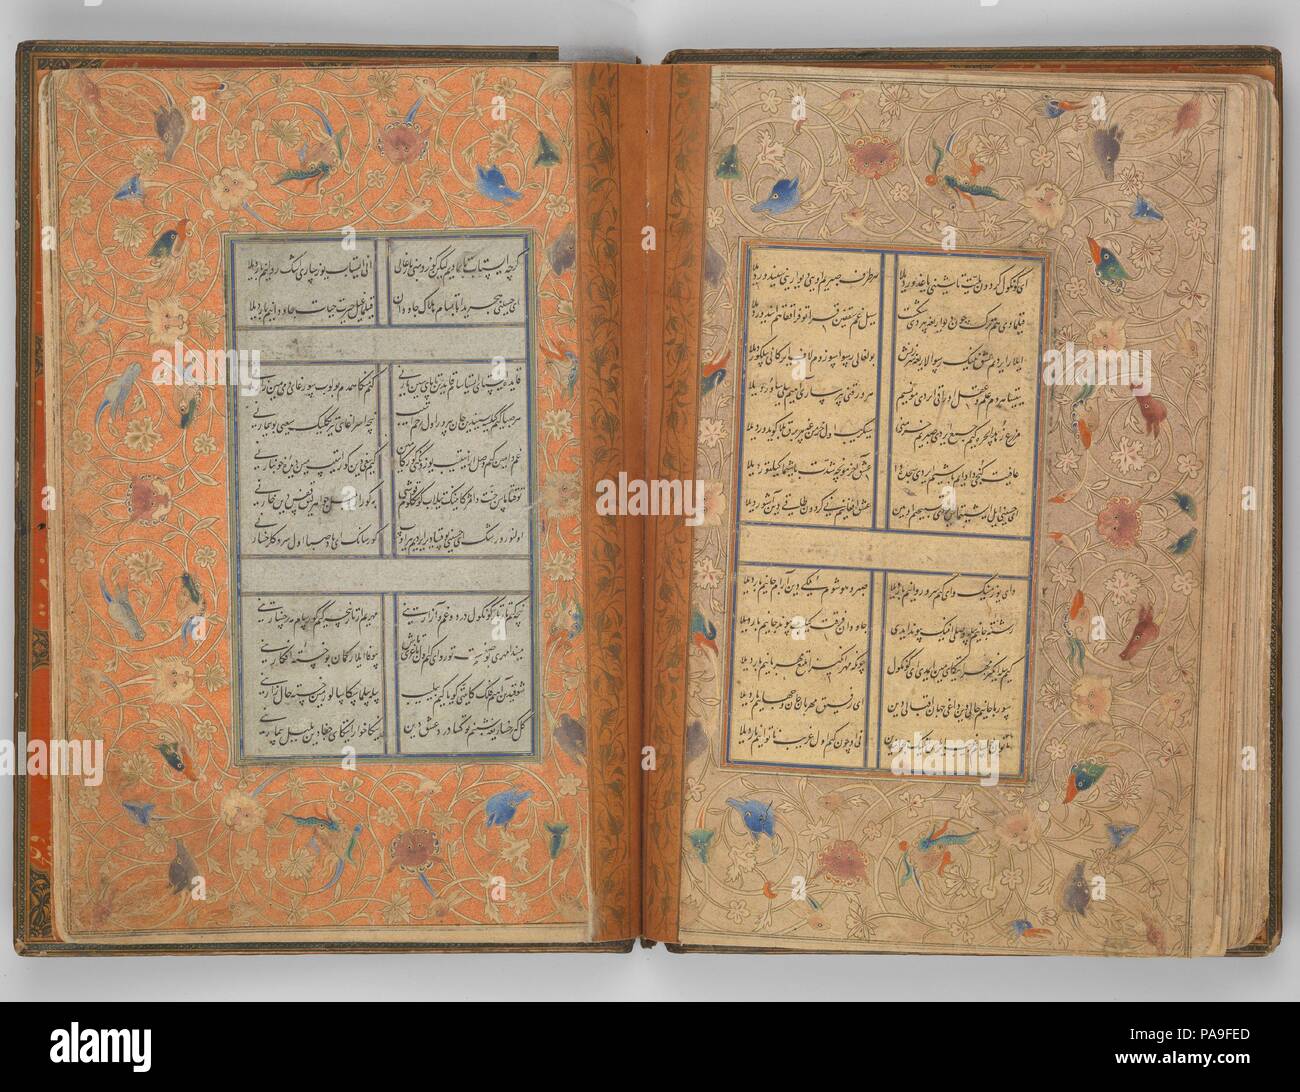 Divan of Sultan Husayn Baiqara. Calligrapher: Sultan 'Ali al-Mashhadi (active late 15th-early 16th century). Dimensions: 10 1/2 x 7 1/4in. (26.7 x 18.4cm). Date: dated A.H 905/ A.D.1500.  This lavishly embellished manuscript comprises a collection (divan) of poetry composed by the late fifteenth-century Timurid ruler Sultan Husain Baiqara (r. 1470-1506) in eastern or Chaghatai Turkish.  The calligraphic text, written on a variety of colorful papers mounted within elaborately stenciled and painted margins, was copied by one of Sultan Husain's favored calligraphers - Sultan 'Ali Mashhadi. Museum Stock Photo